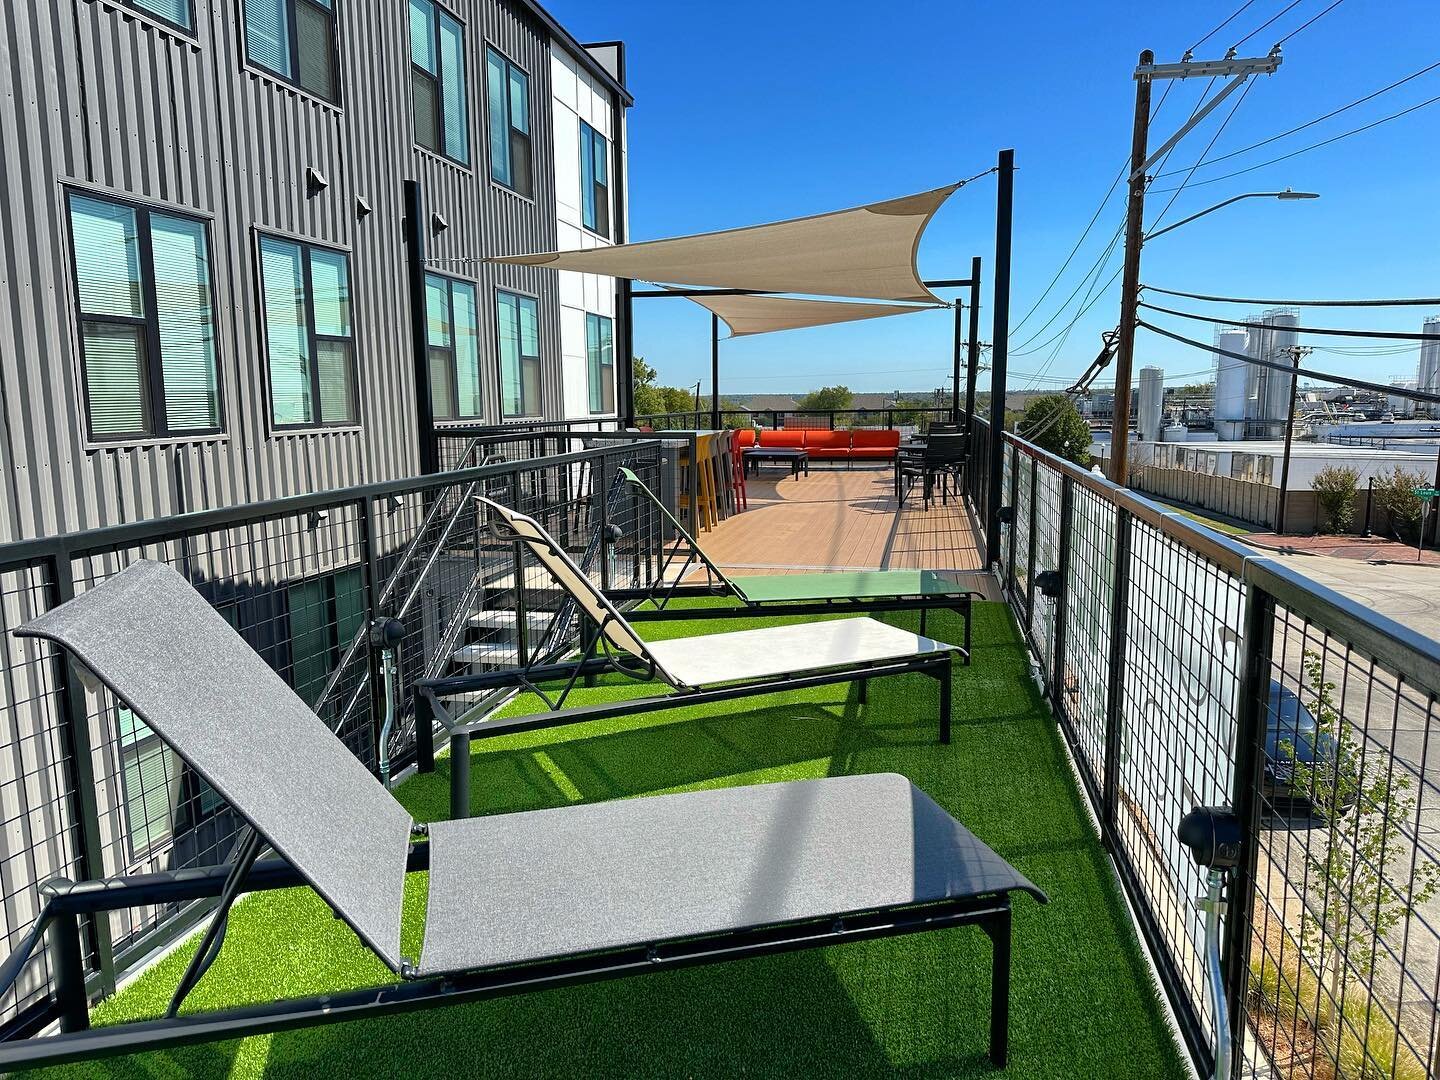 Perfect spot to enjoy this beautiful weather ☀️ Call us today at 682-708-2646 to schedule a tour😊 #fortworthapartments #fortworthliving #studioapartment #cohoapartments